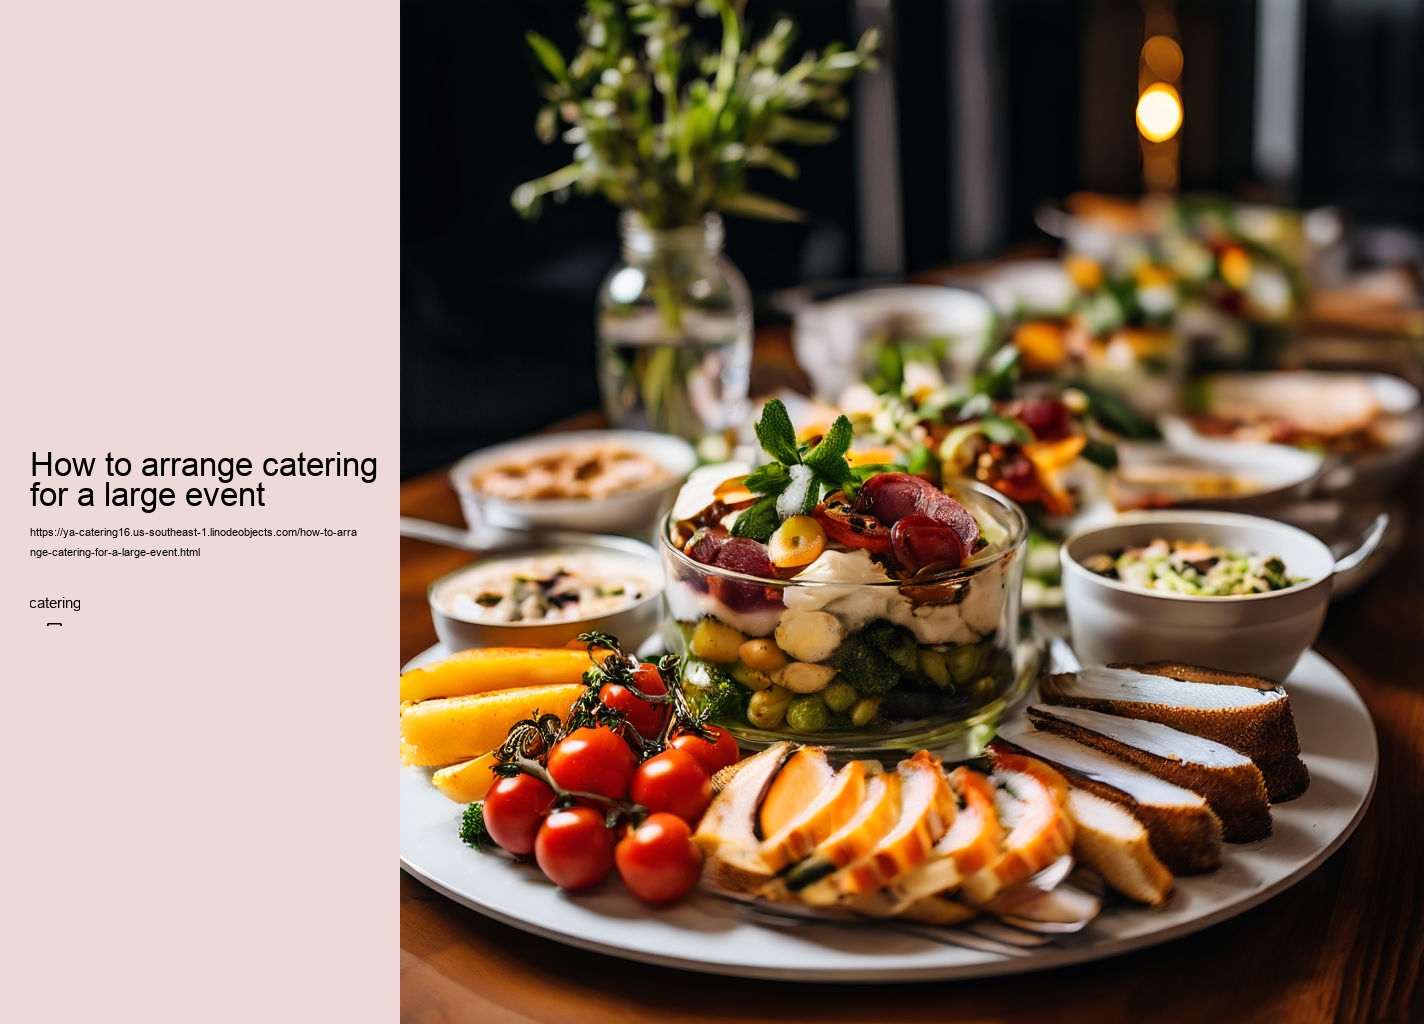 How to arrange catering for a large event